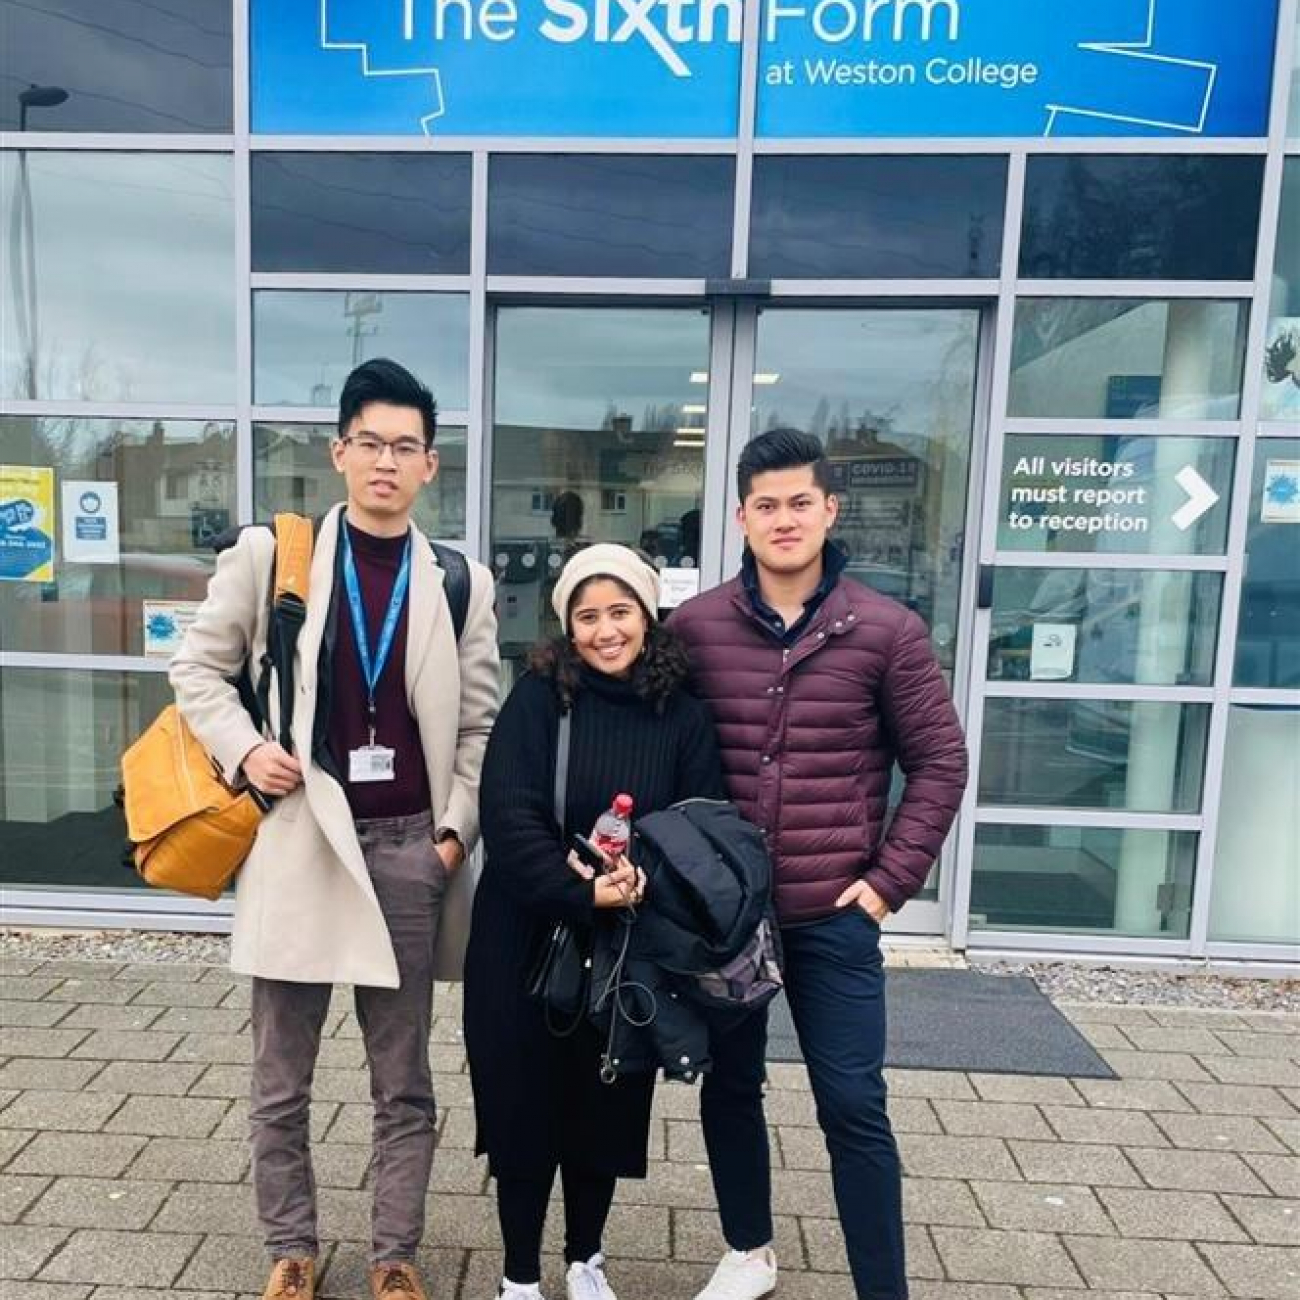 Lecturer Ethan Shi with Nour and Kenny stood outside Weston College's Sixth Form based at their Loxton Campus